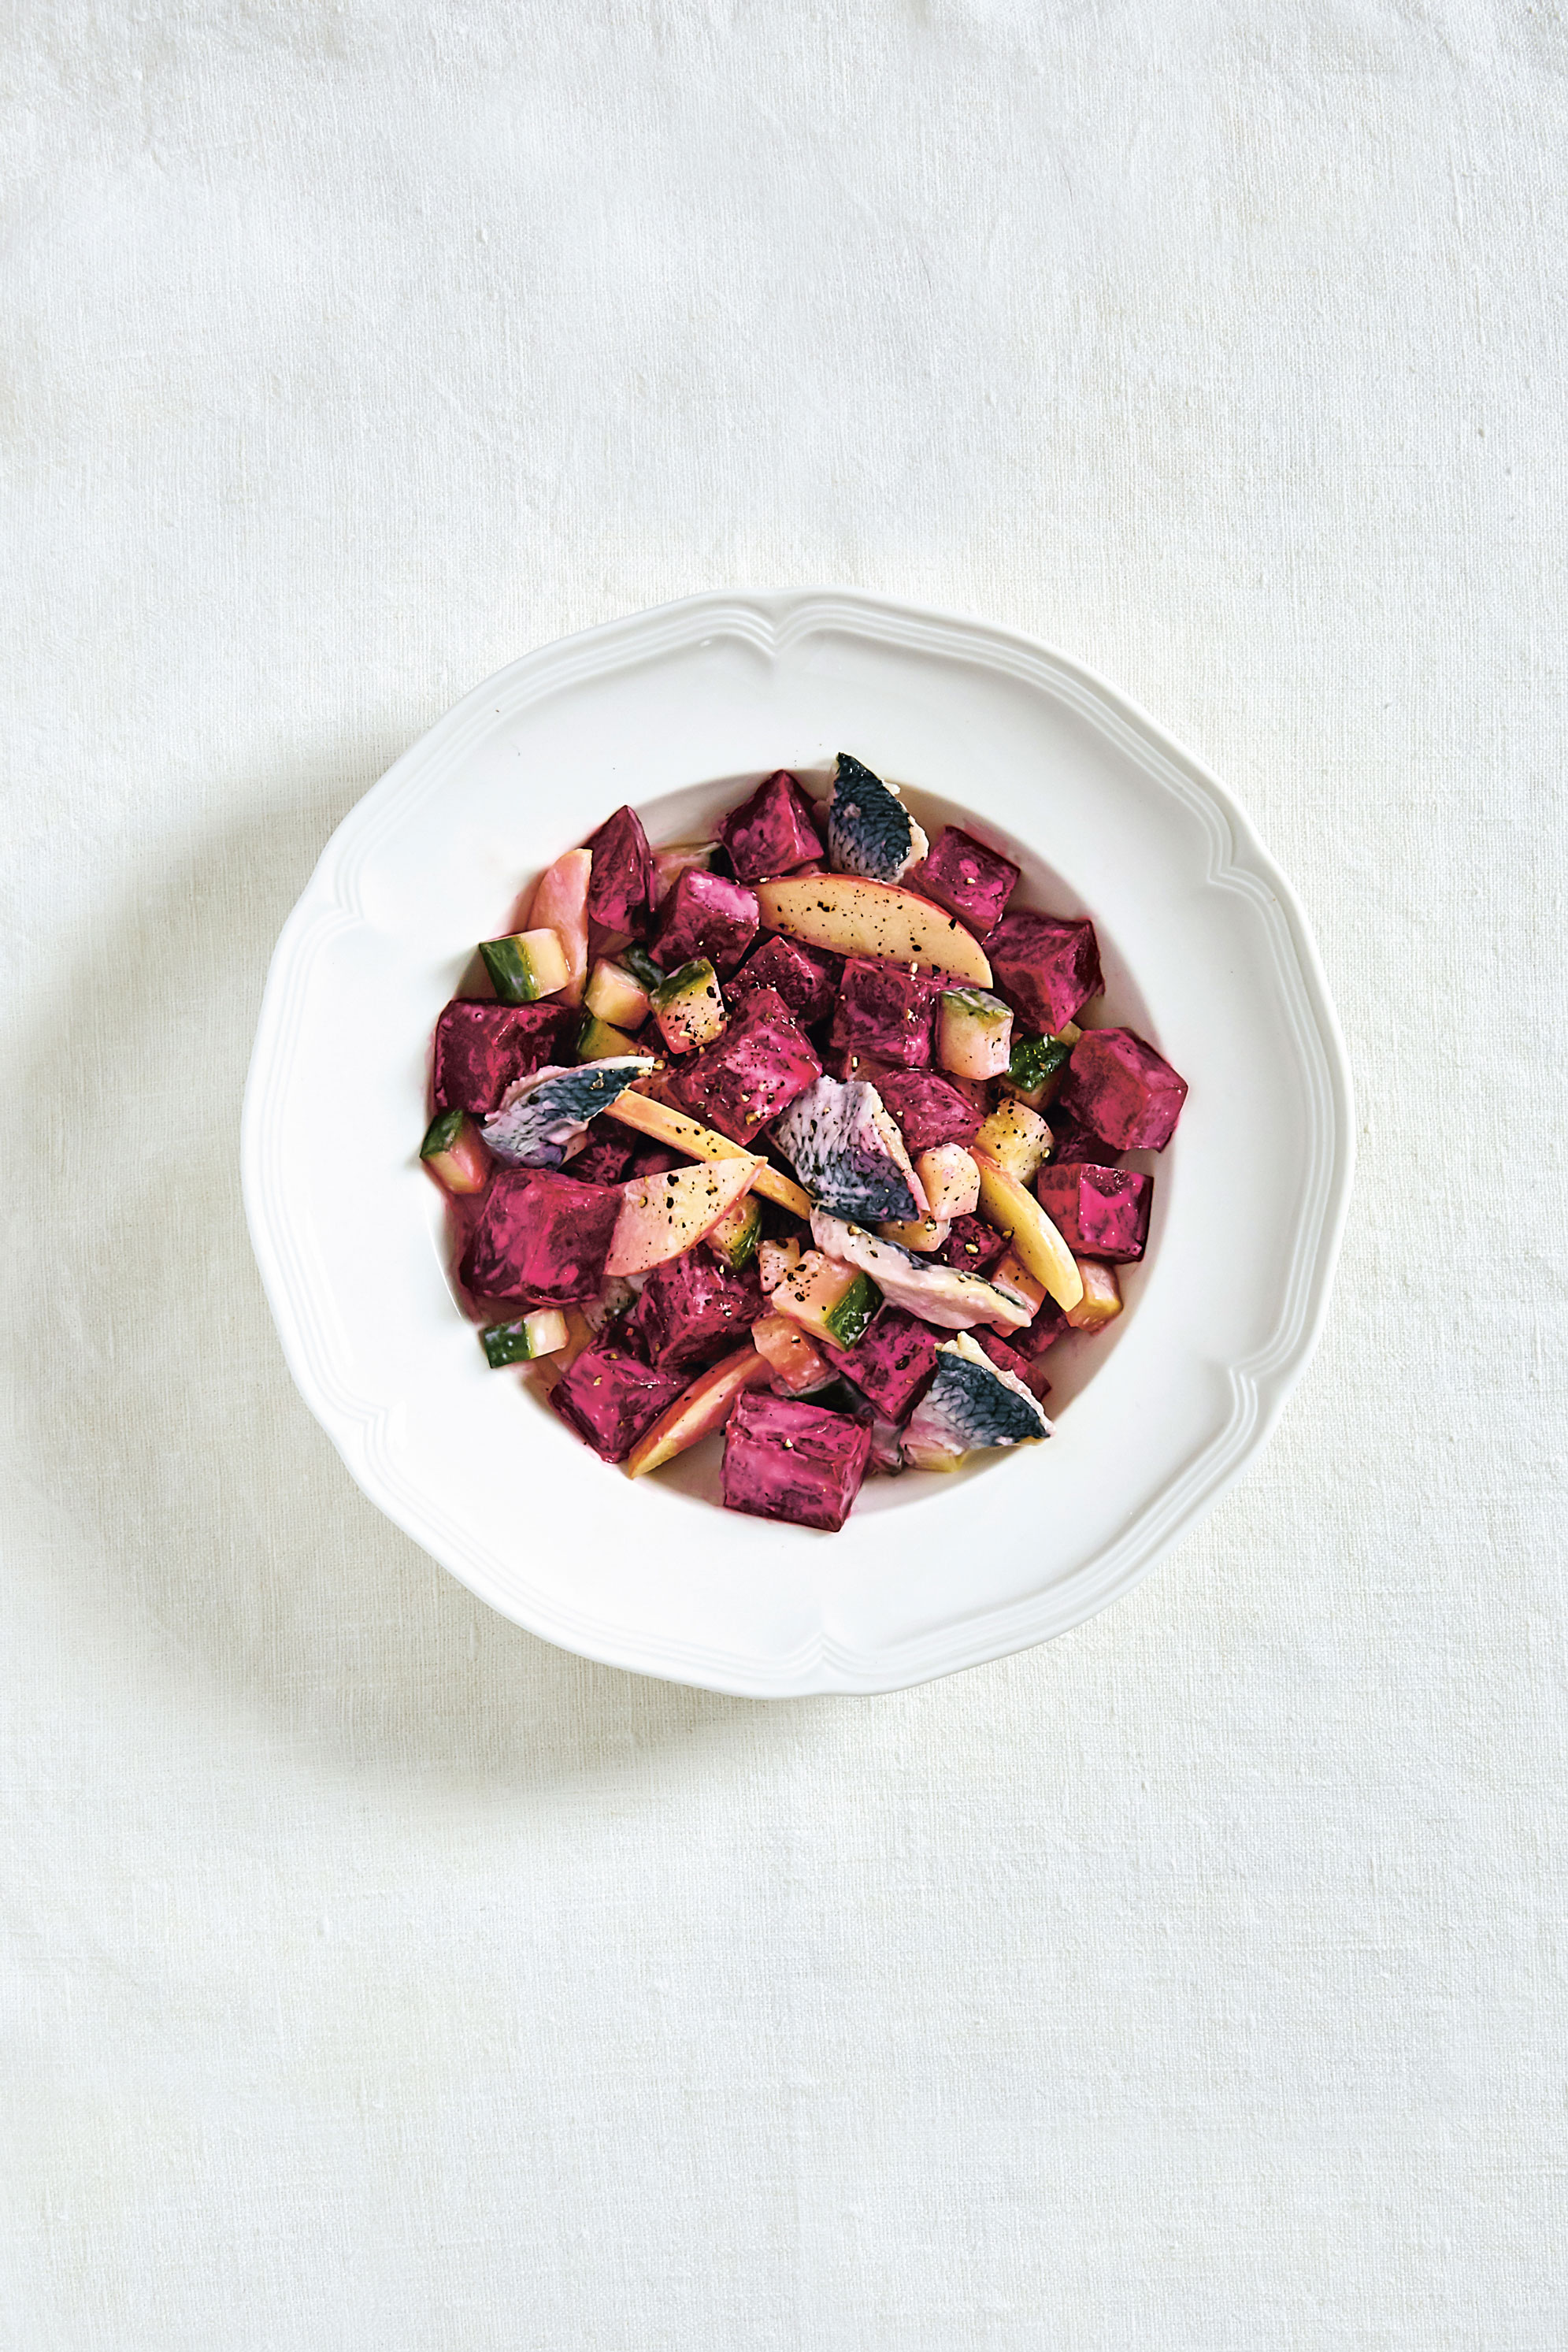 Herring and Beetroot (Beet) Salad. Photography by Danielle Acken from The German Cookbook